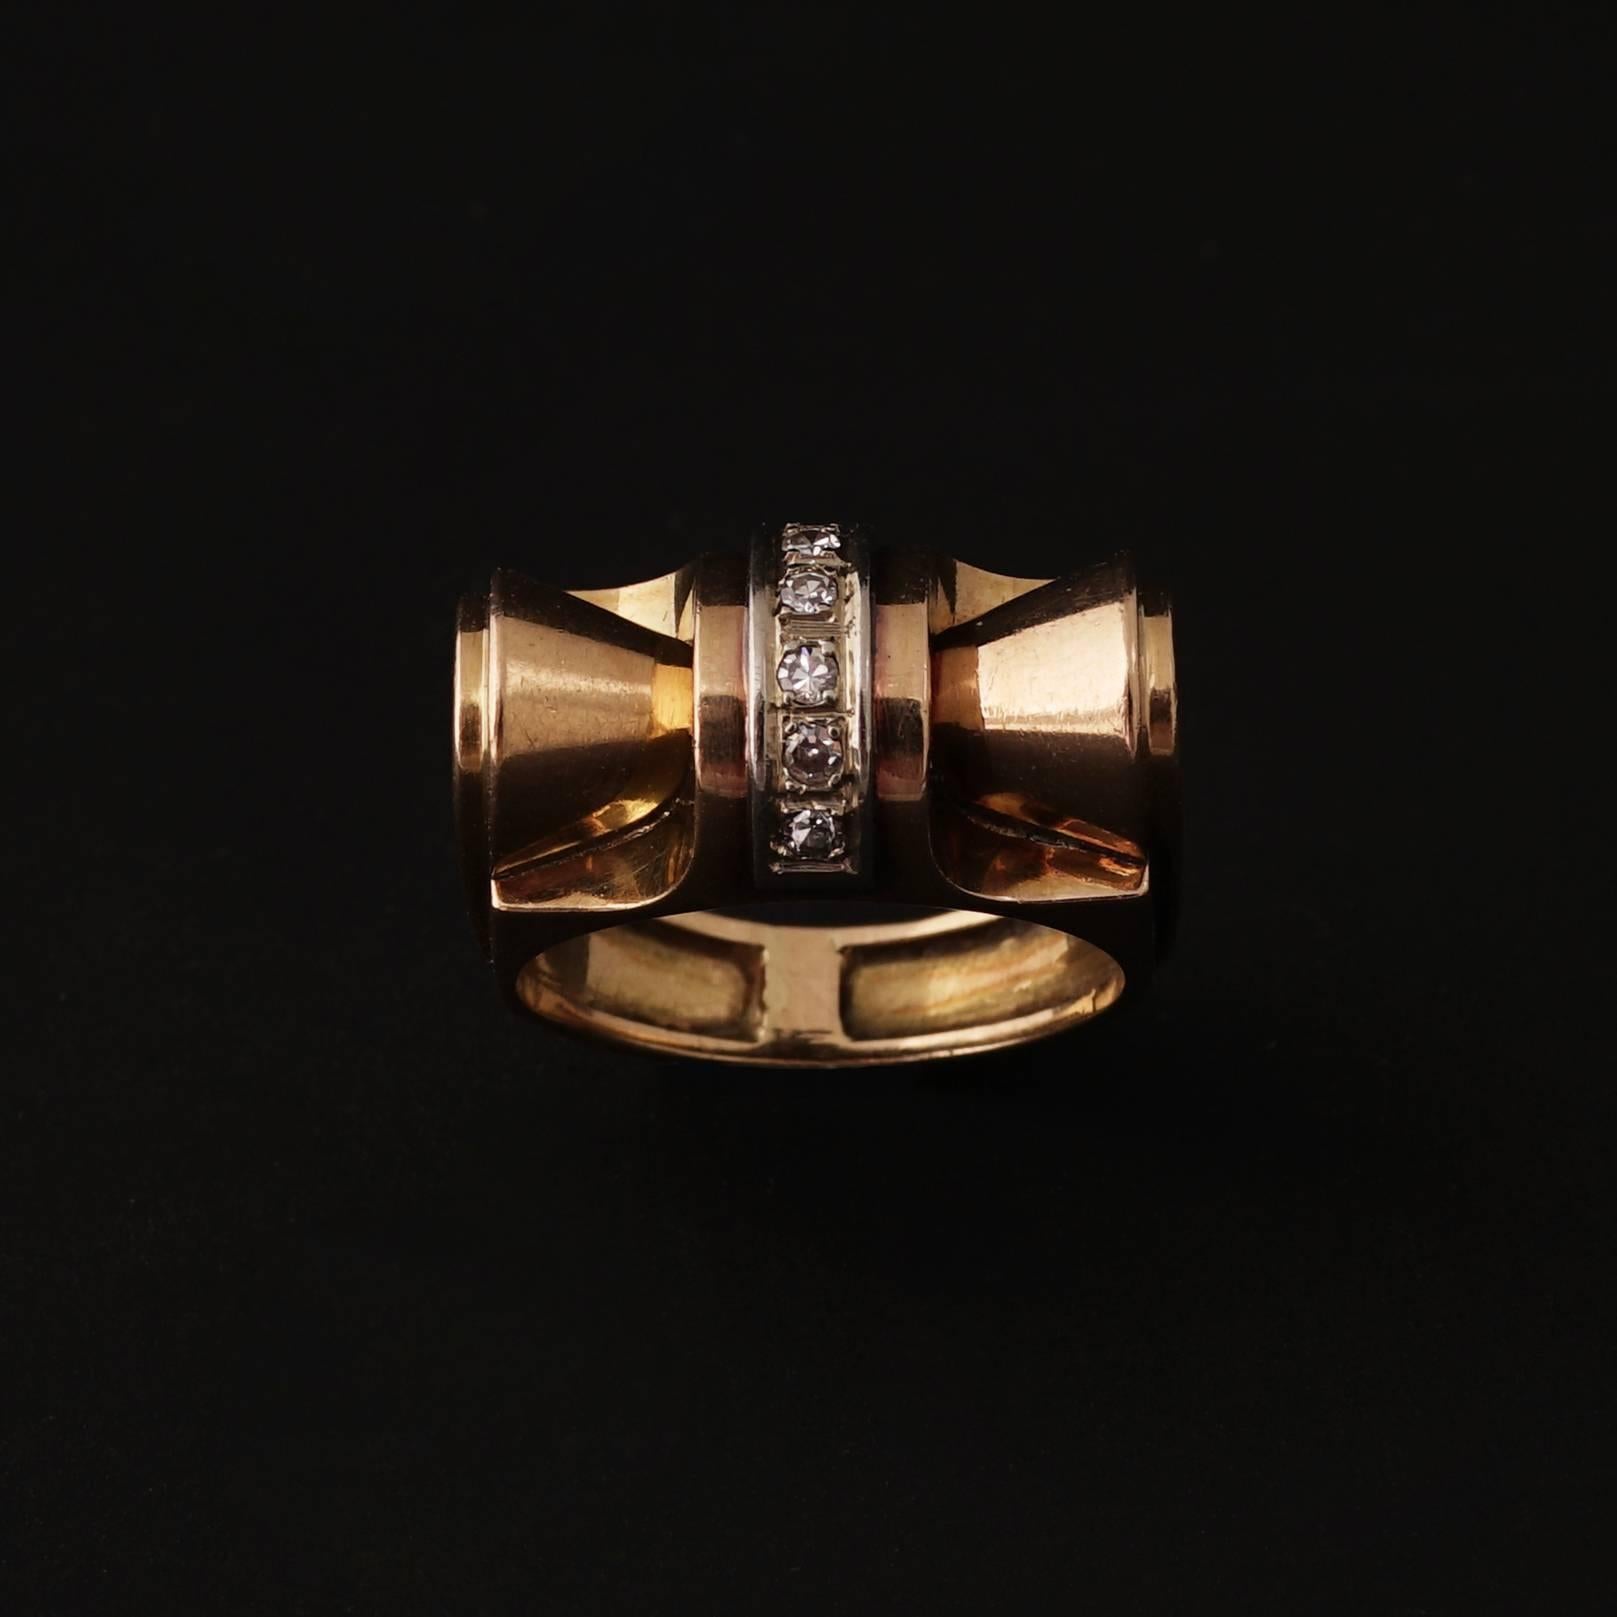 Beautiful Retro Tank Ring, Circa 1940
18K Gold (Marked), Platinum (950°/°°) bridge with 8/8 Round-cut Diamonds
The smooth shape of the piece was due to a precise cut work of the gold. 
The Ring wears a nice patina, with light alteration of gold and